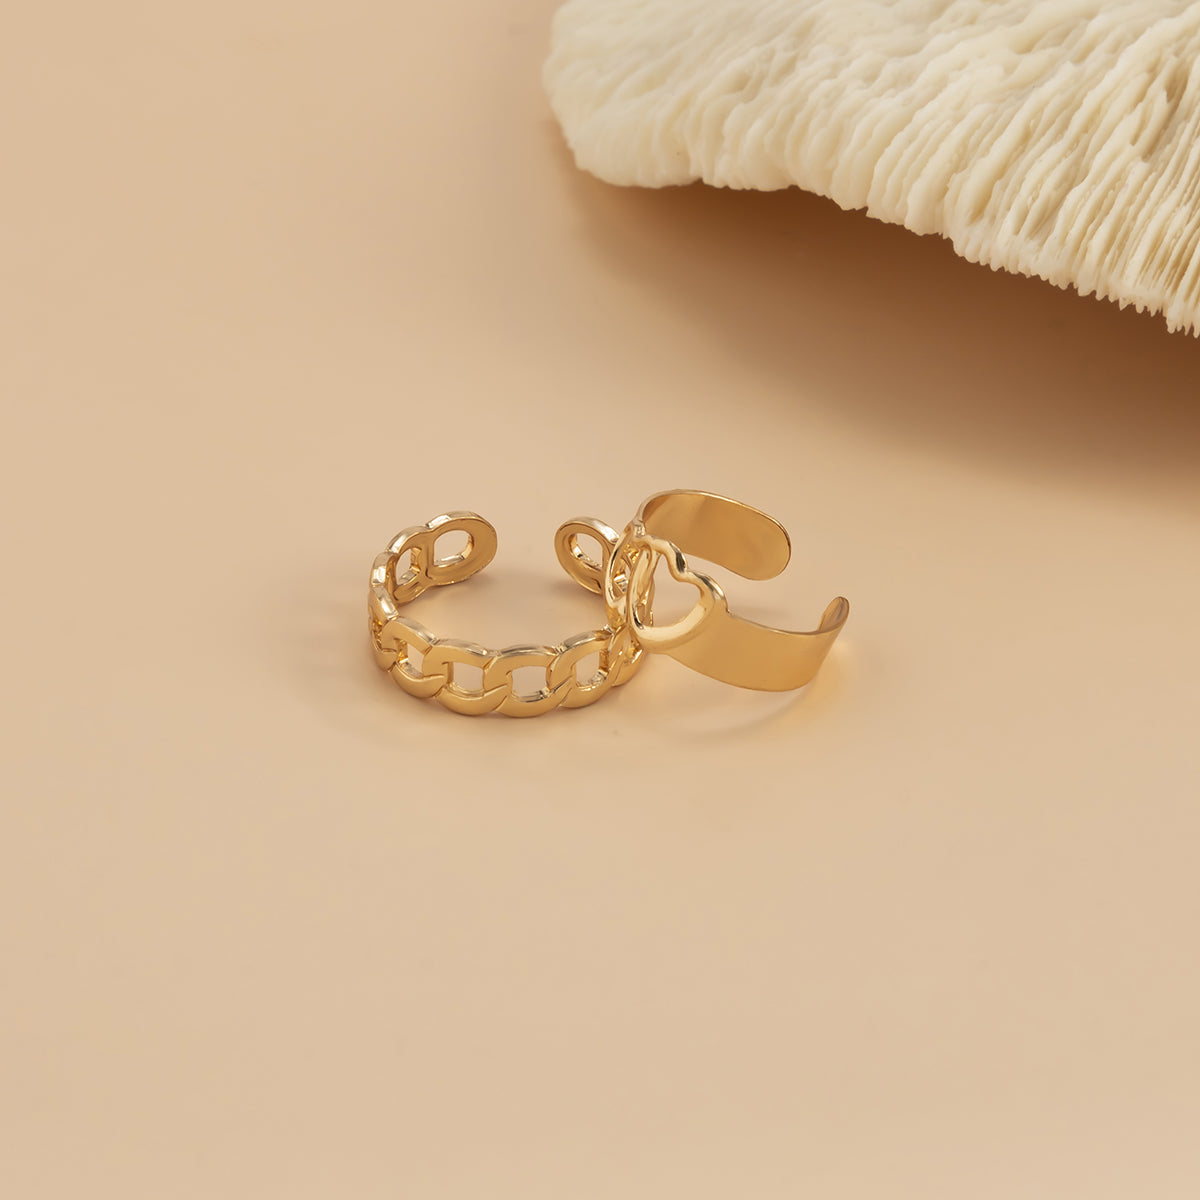 18K Gold-Plated Openwork Heart Toe Ring Set